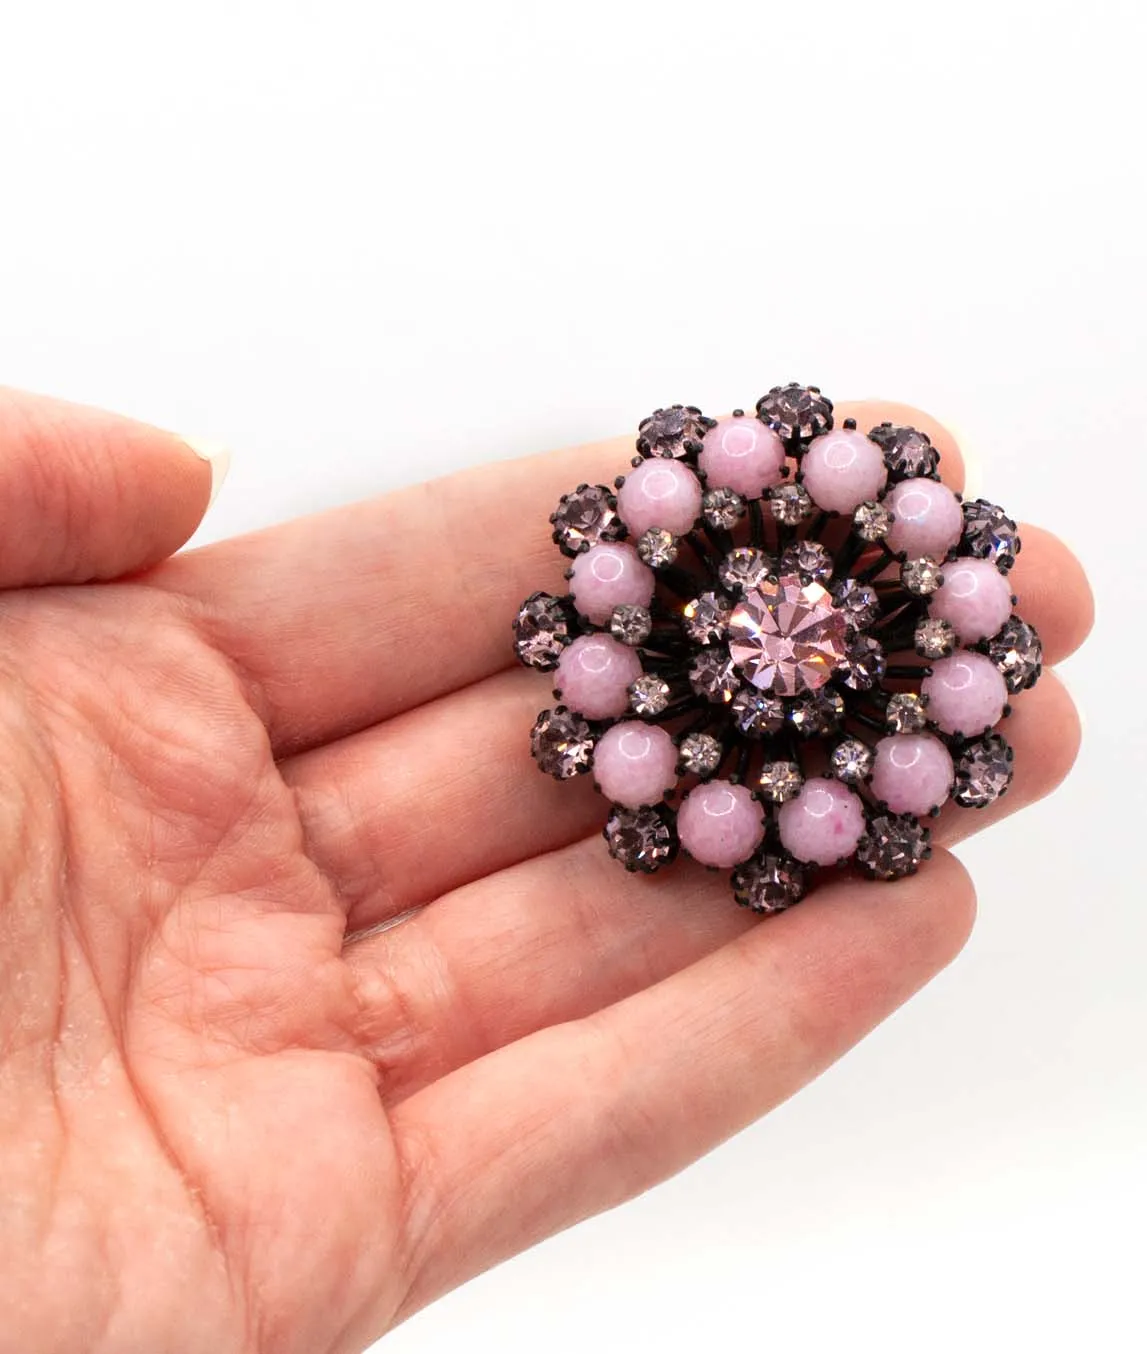 Pink and black vintage round Austrian brooch held in a hand